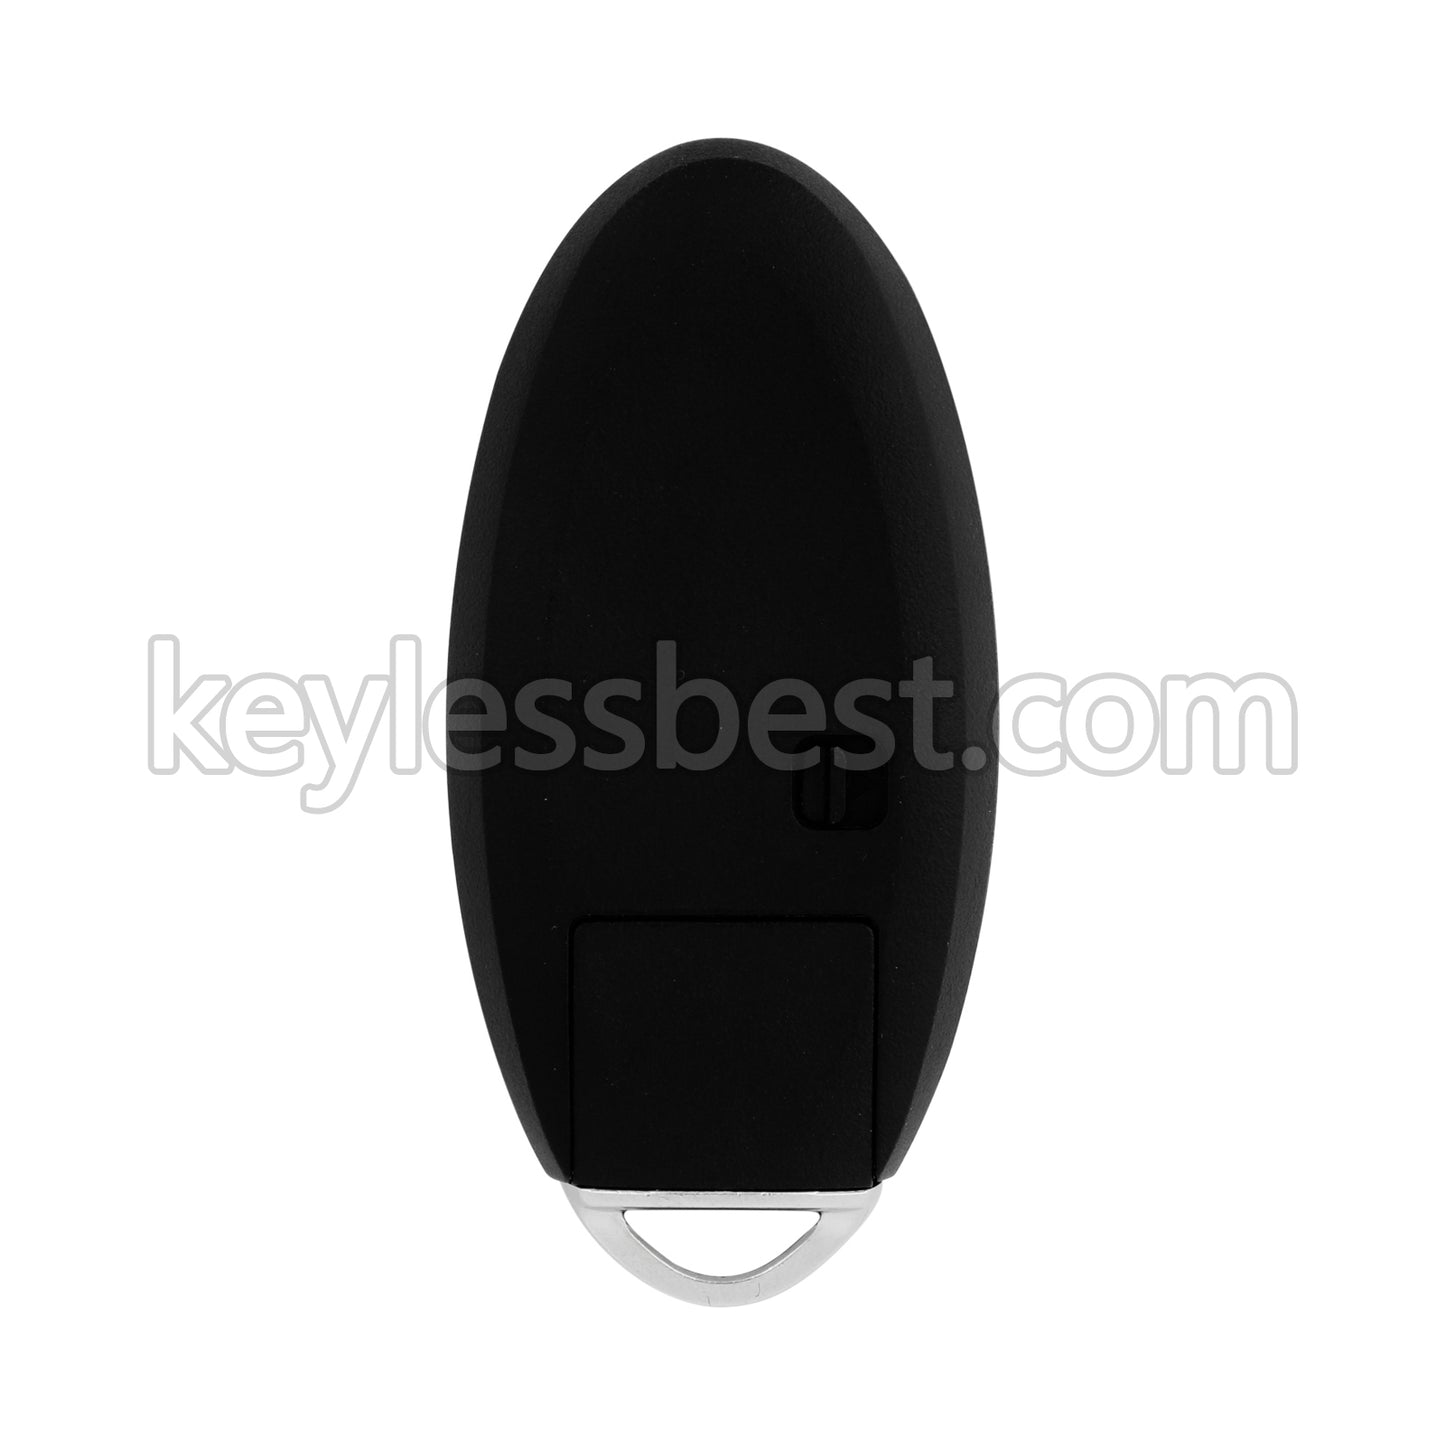 2014 - 2018 Nissan Rogue / 3 Buttons Remote Key / KR5S180144106 / 433MHz